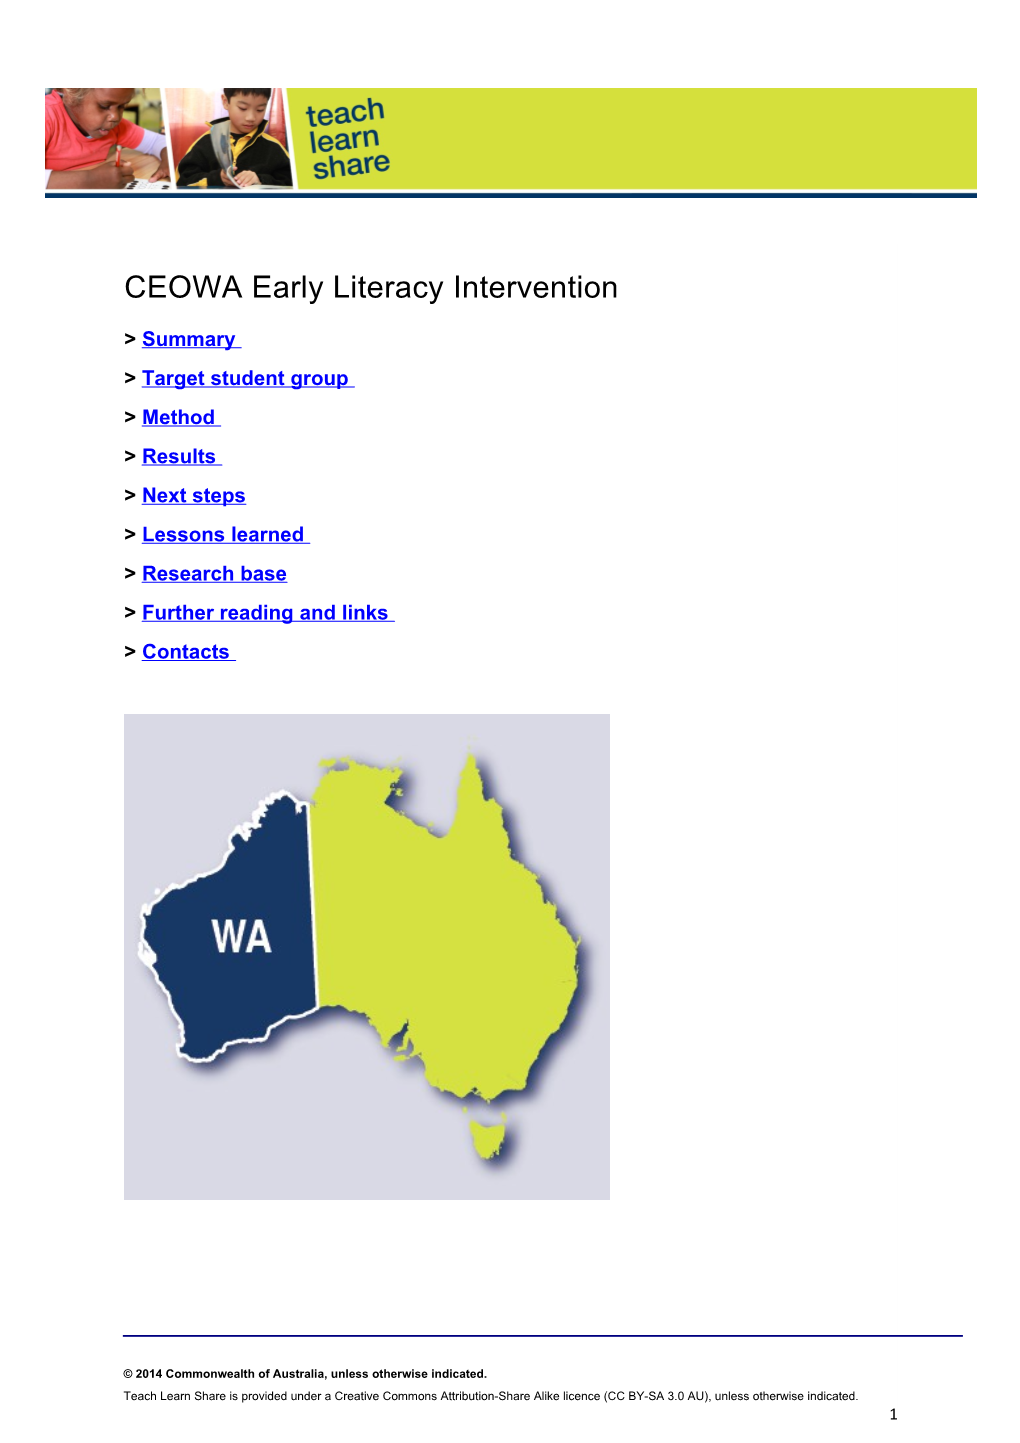 CEOWA Early Literacy Intervention